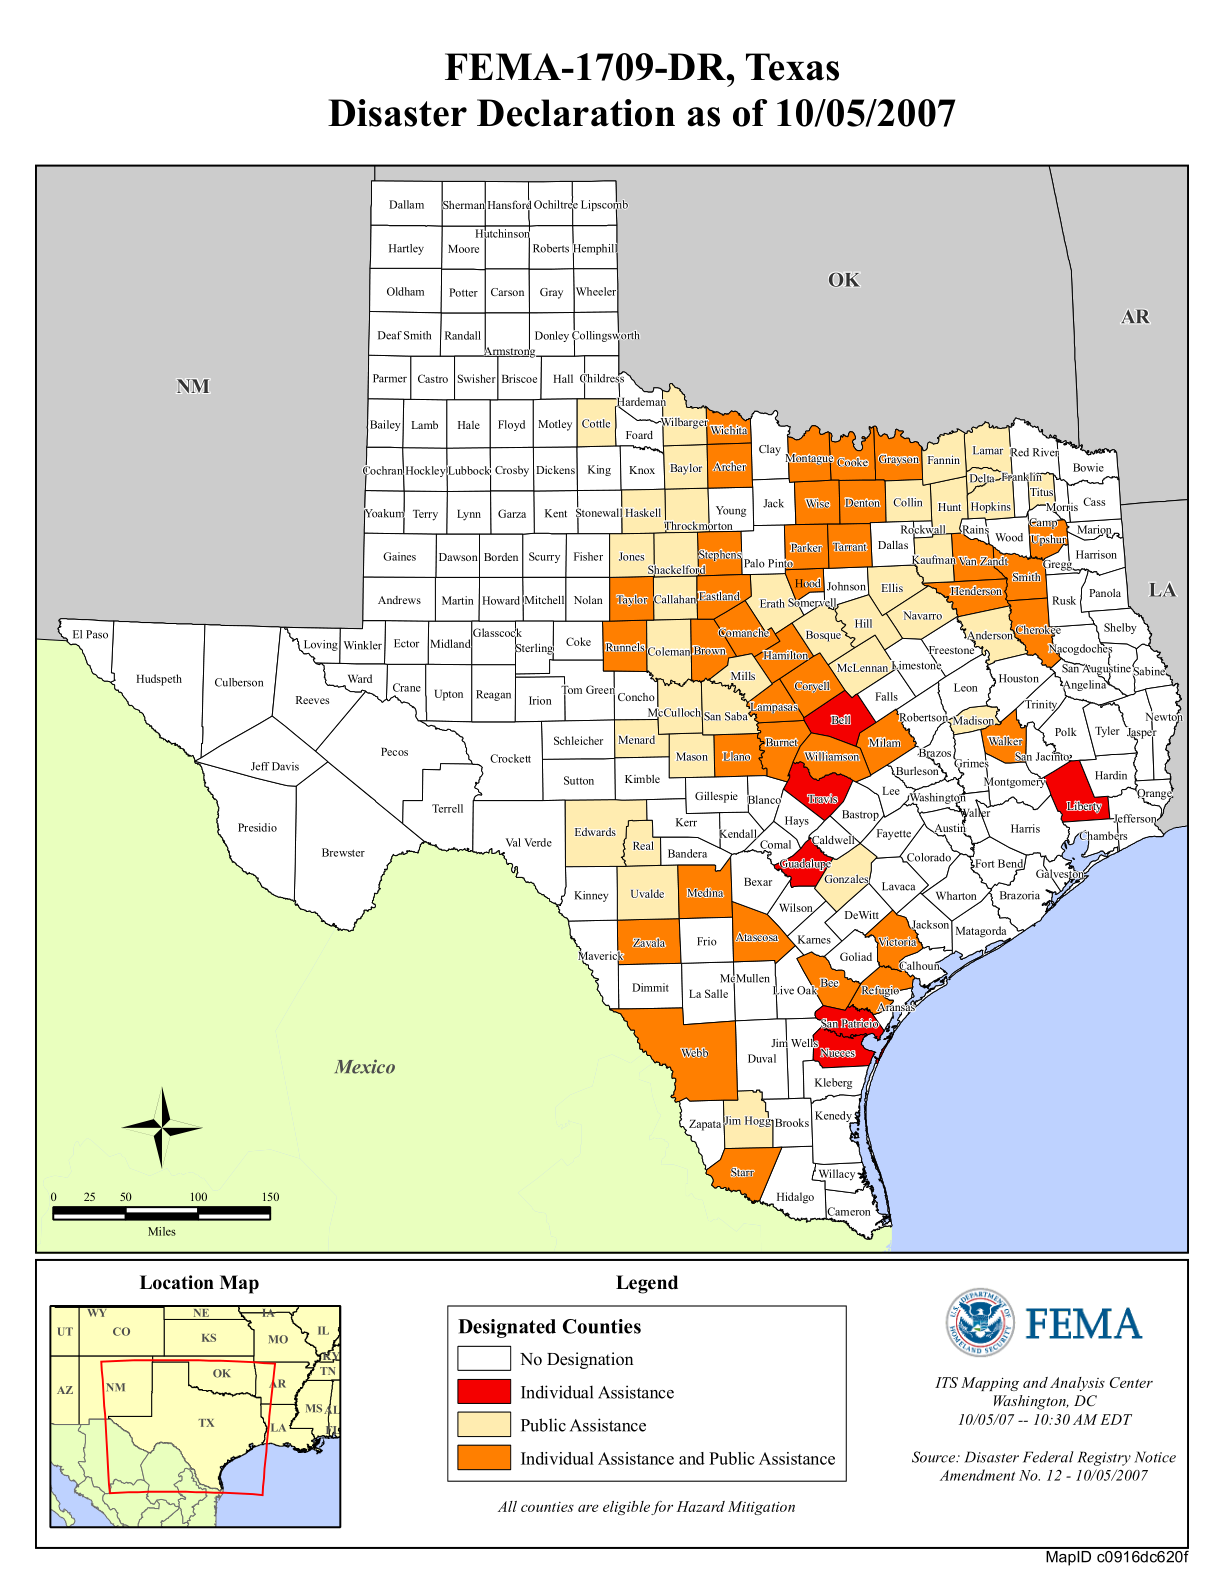 tornadoes in texas map Texas Severe Storms Tornadoes And Flooding Dr 1709 Fema Gov tornadoes in texas map